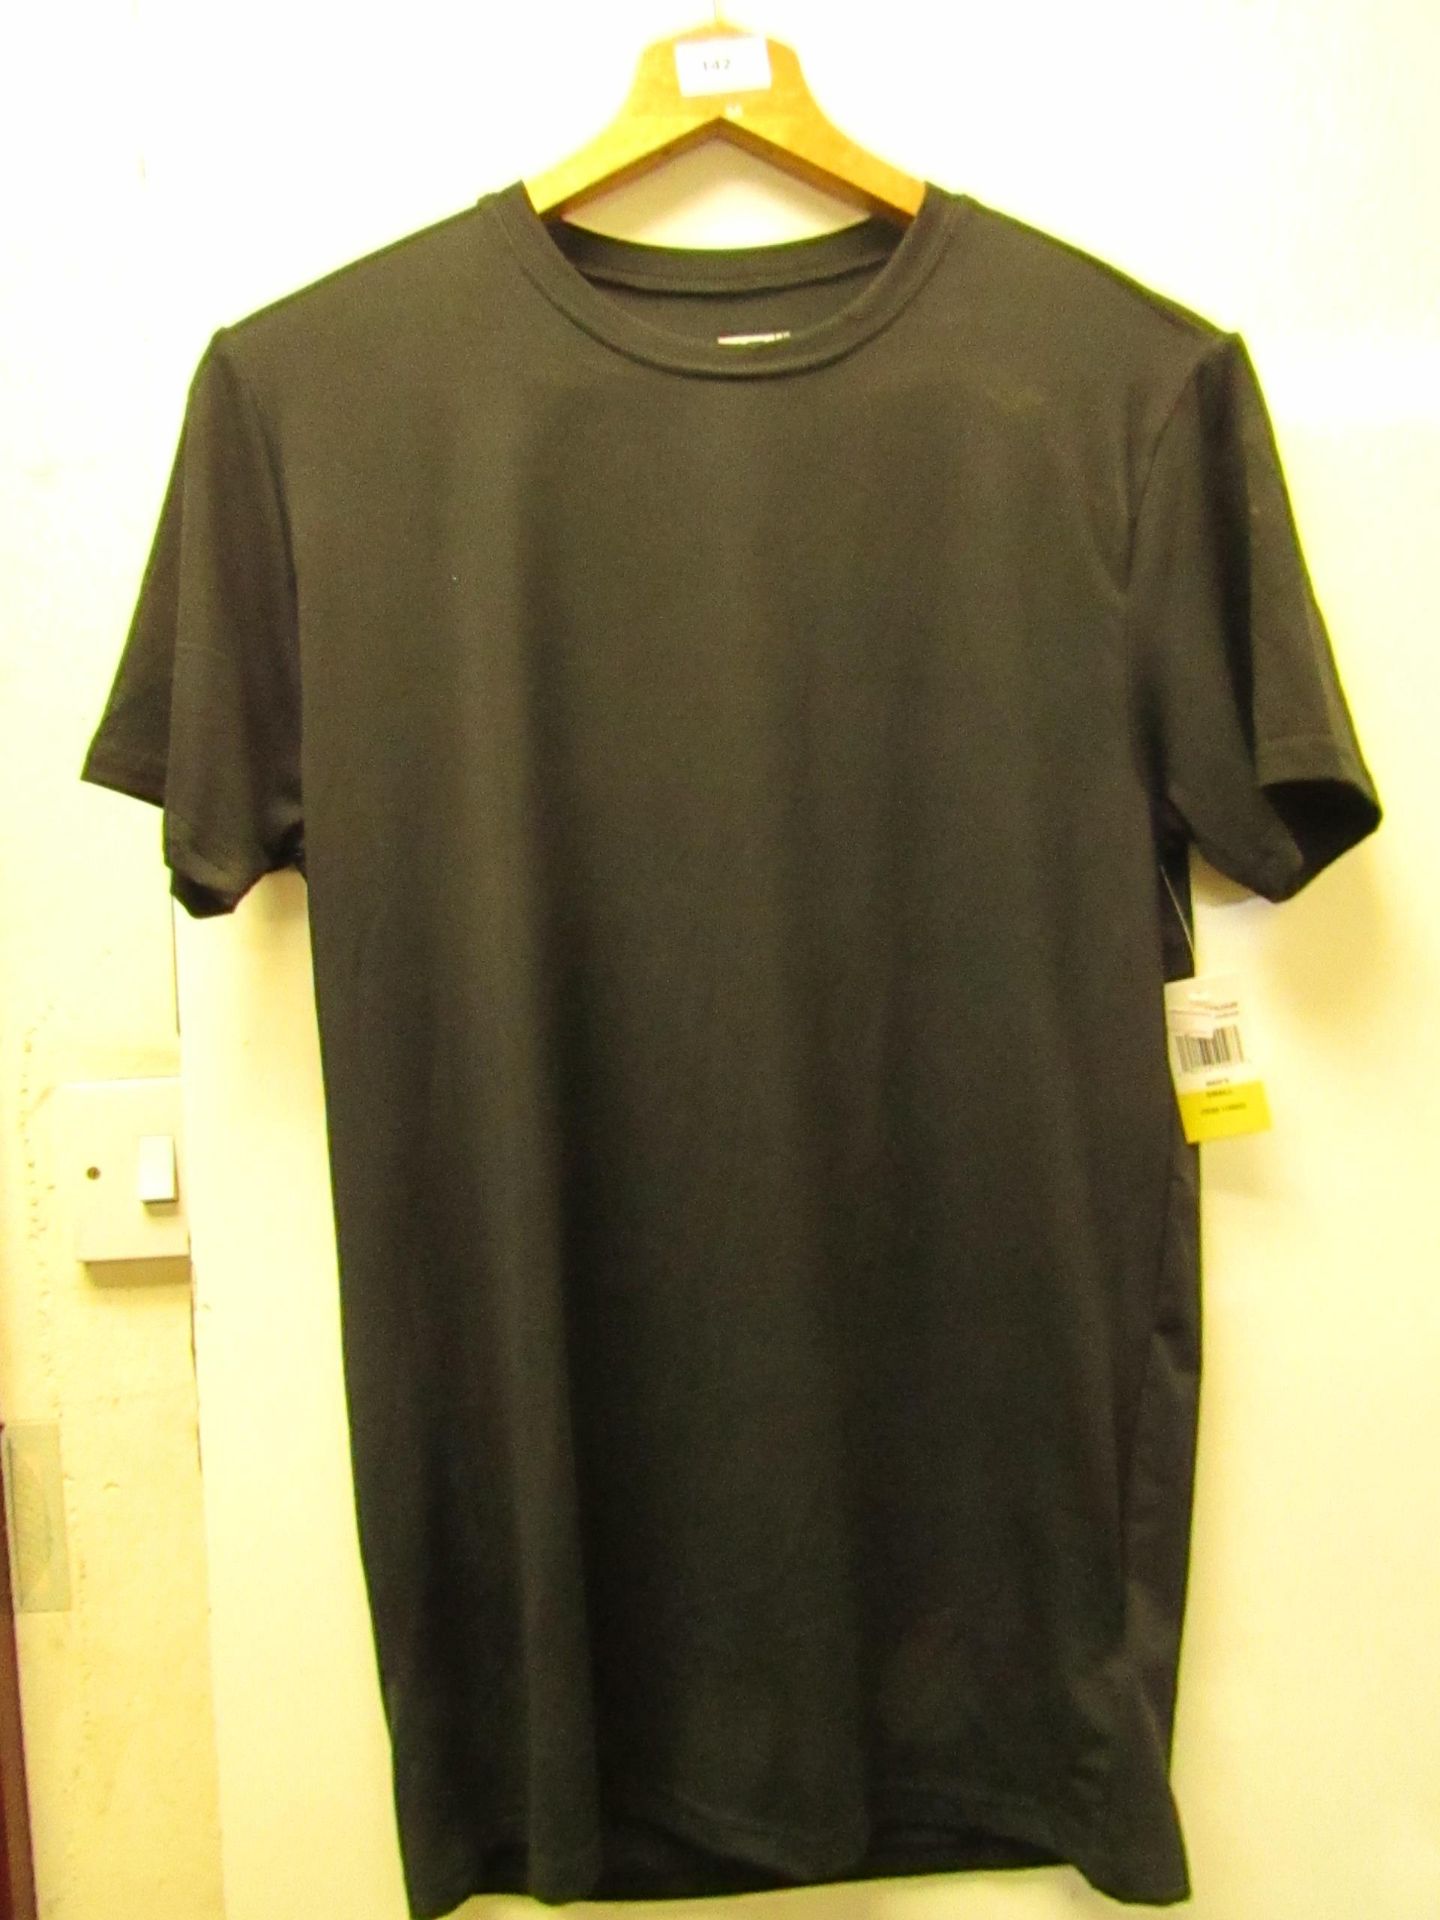 1 x 32 Degrees T/Shirt Black Size S new with tag